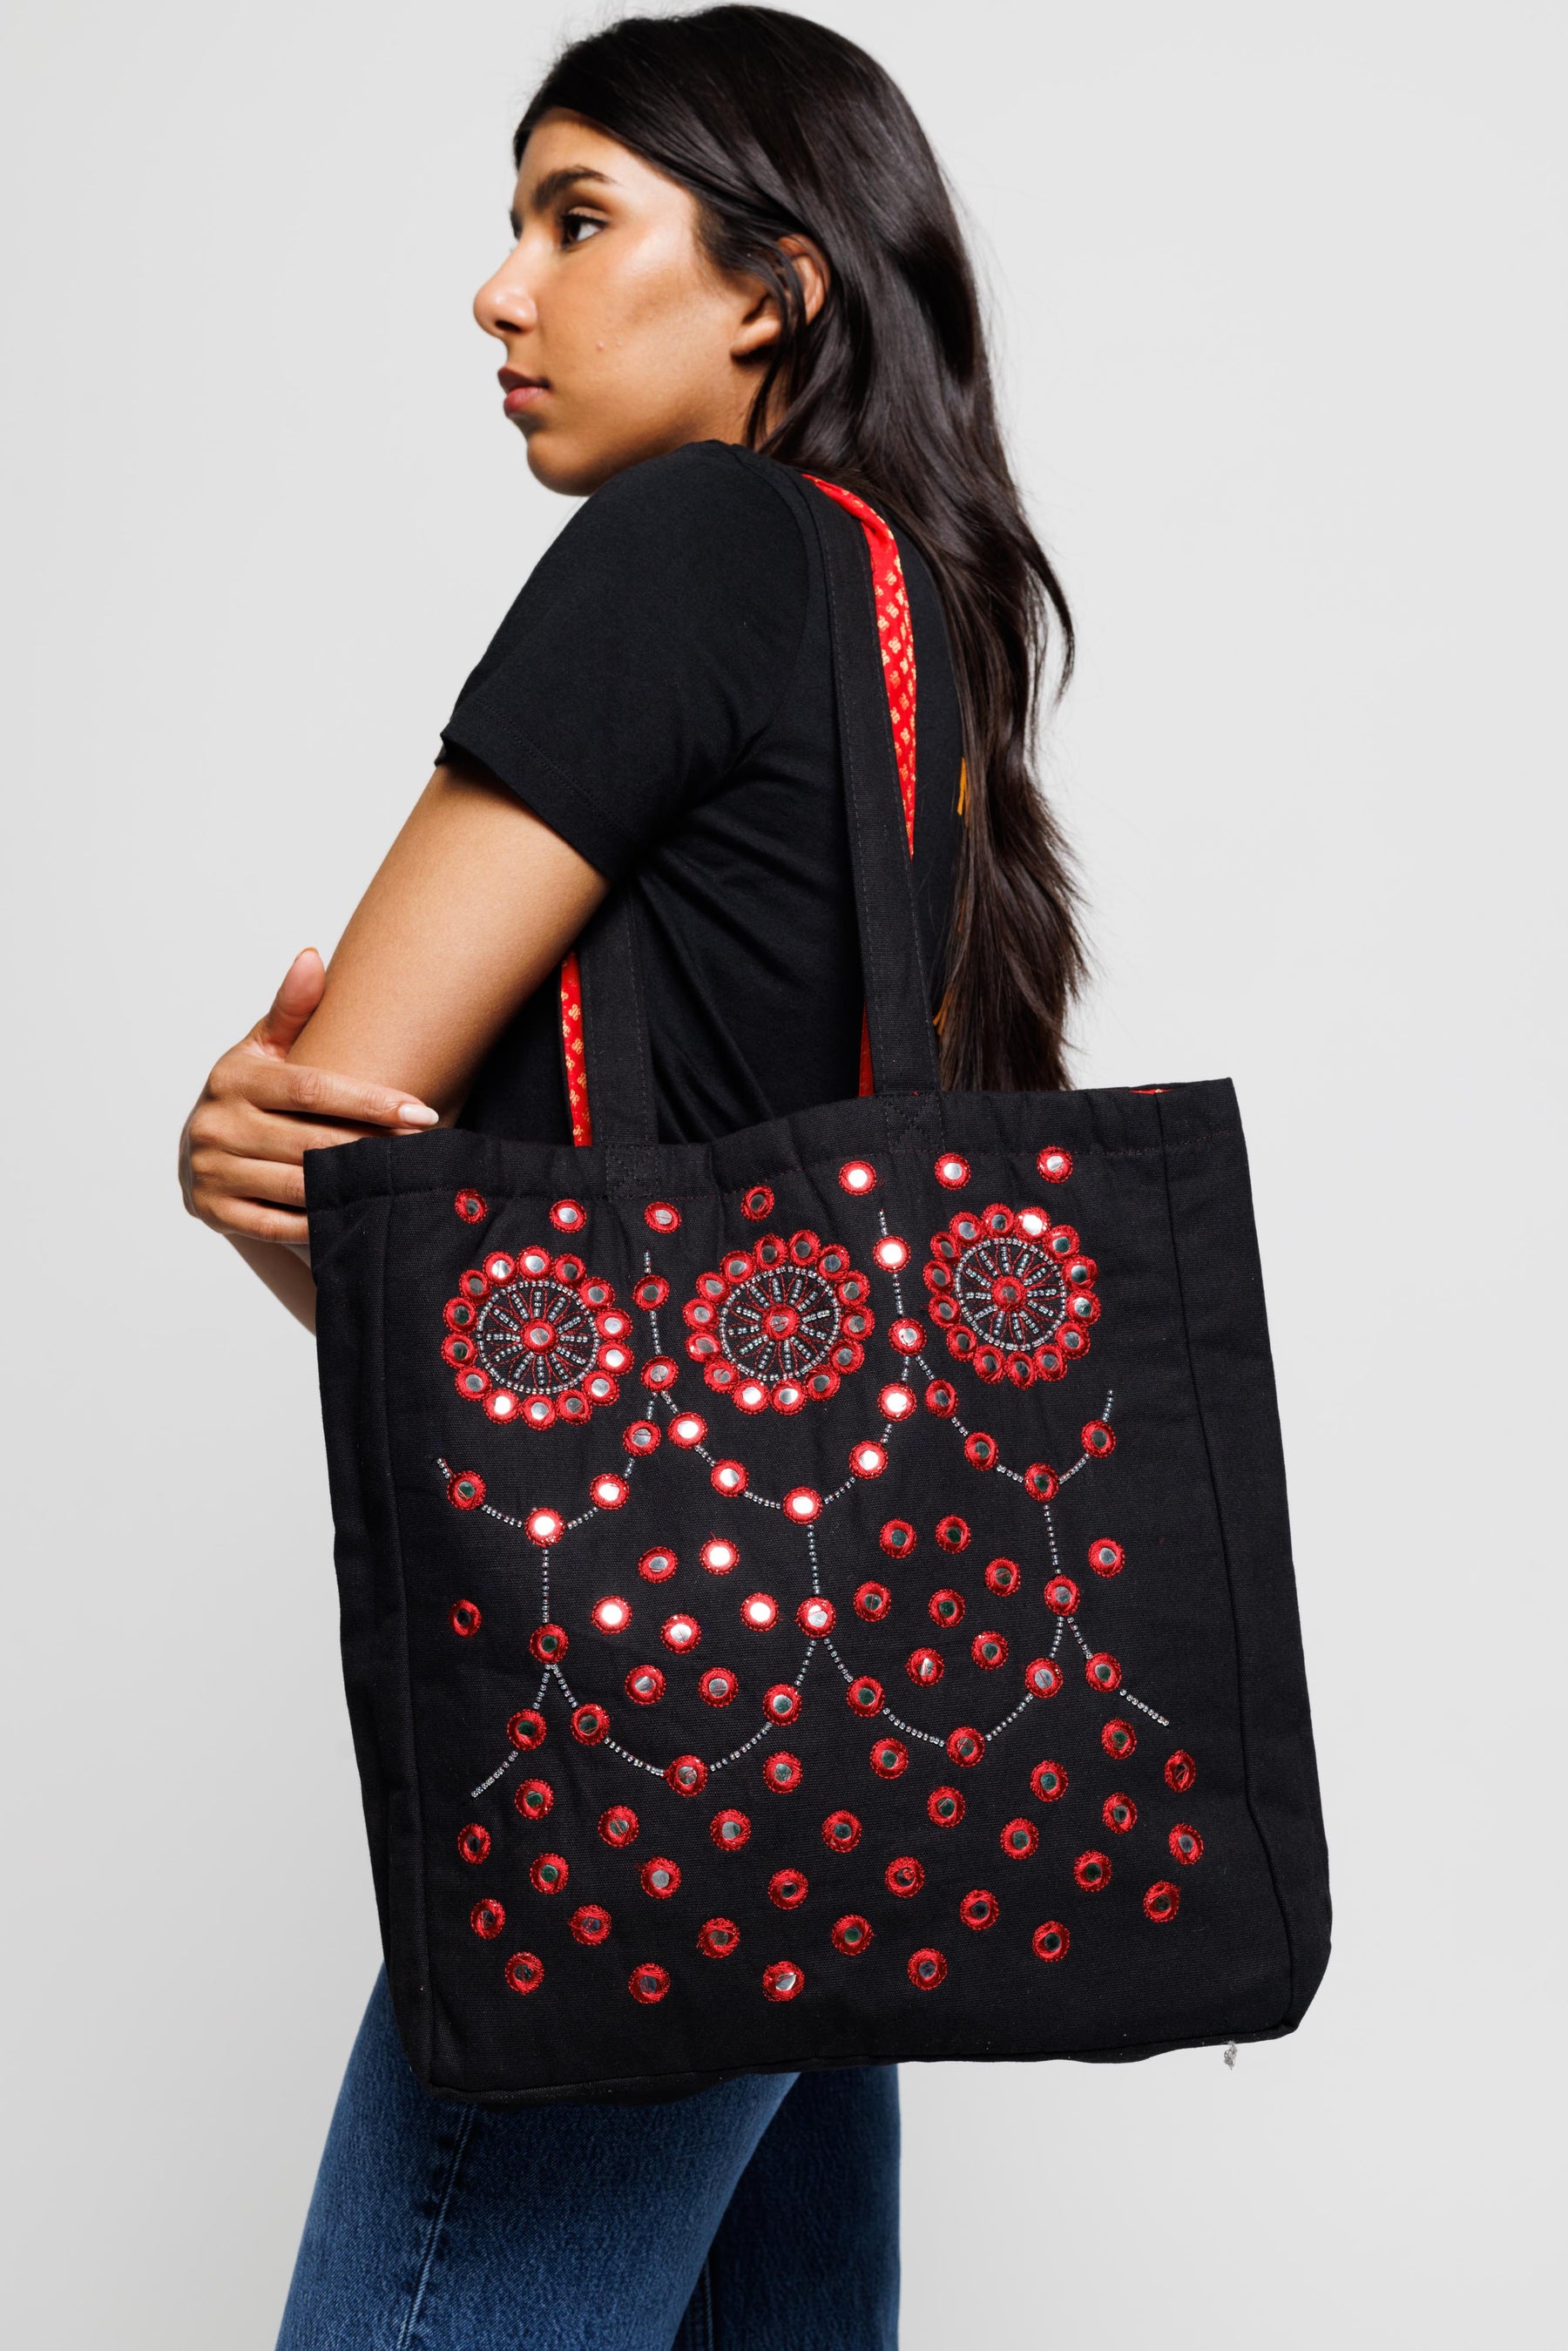 The Aunties are Coming Tote